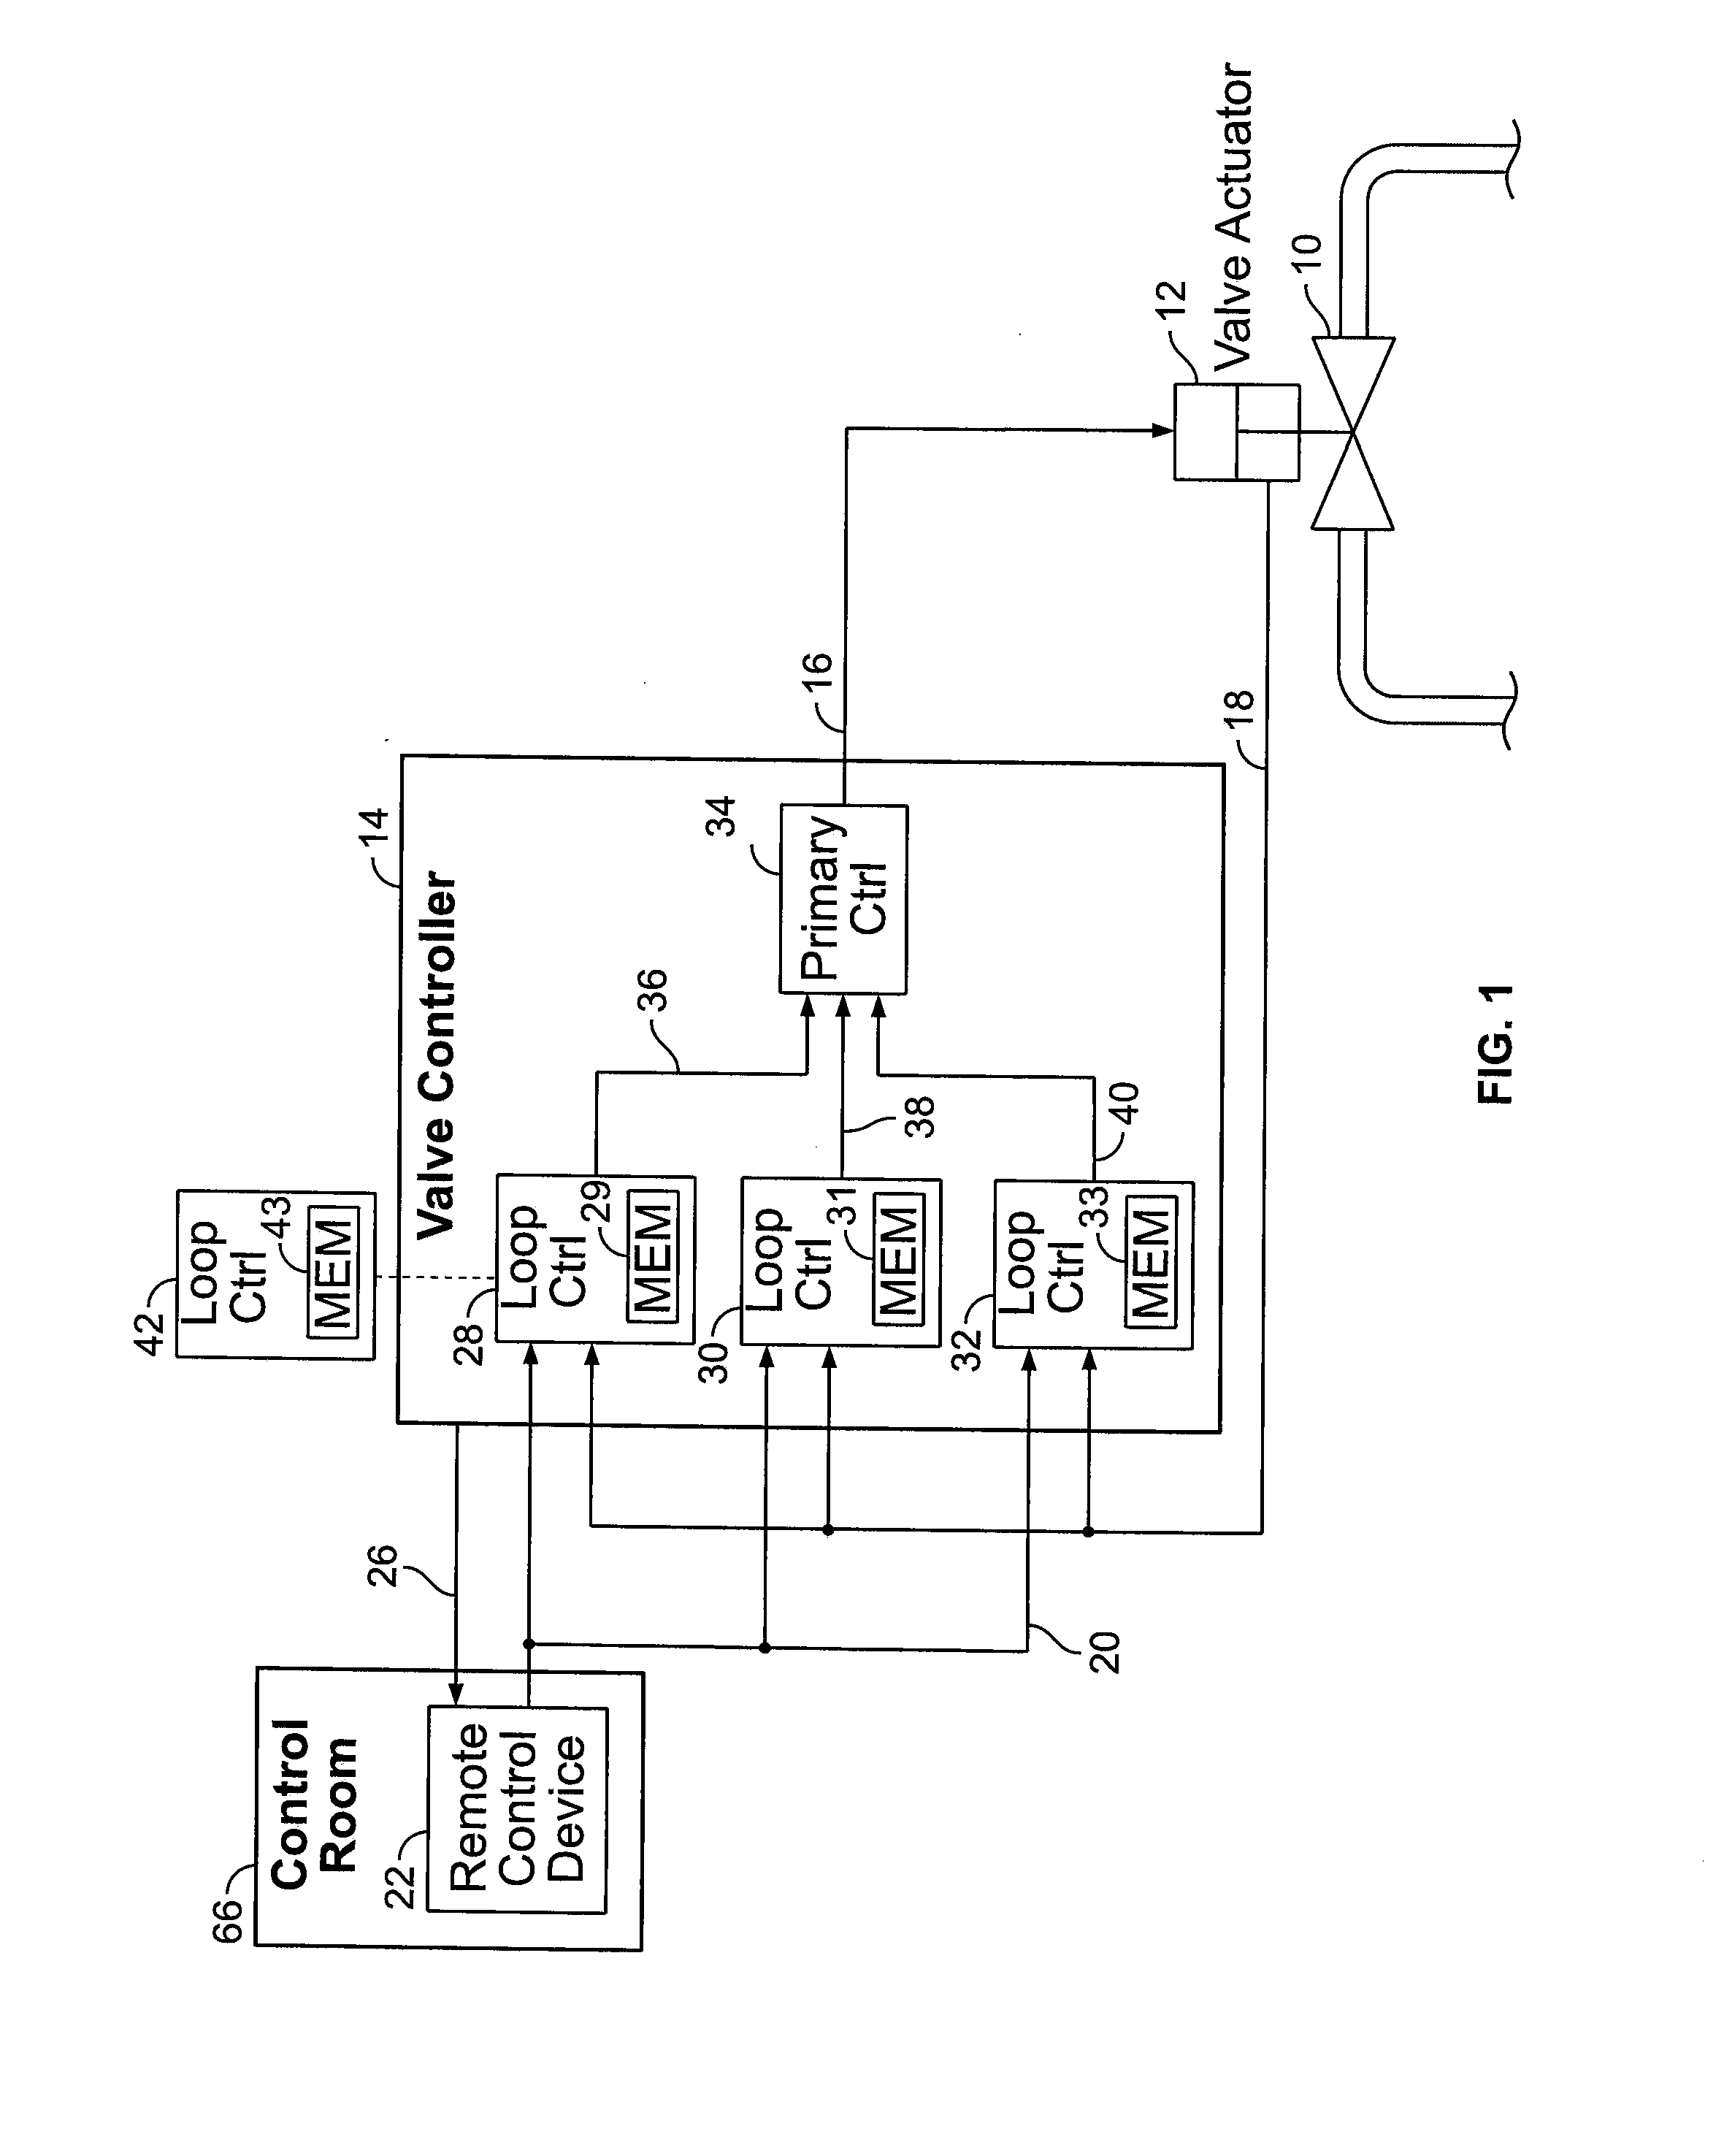 Actuator control device and method